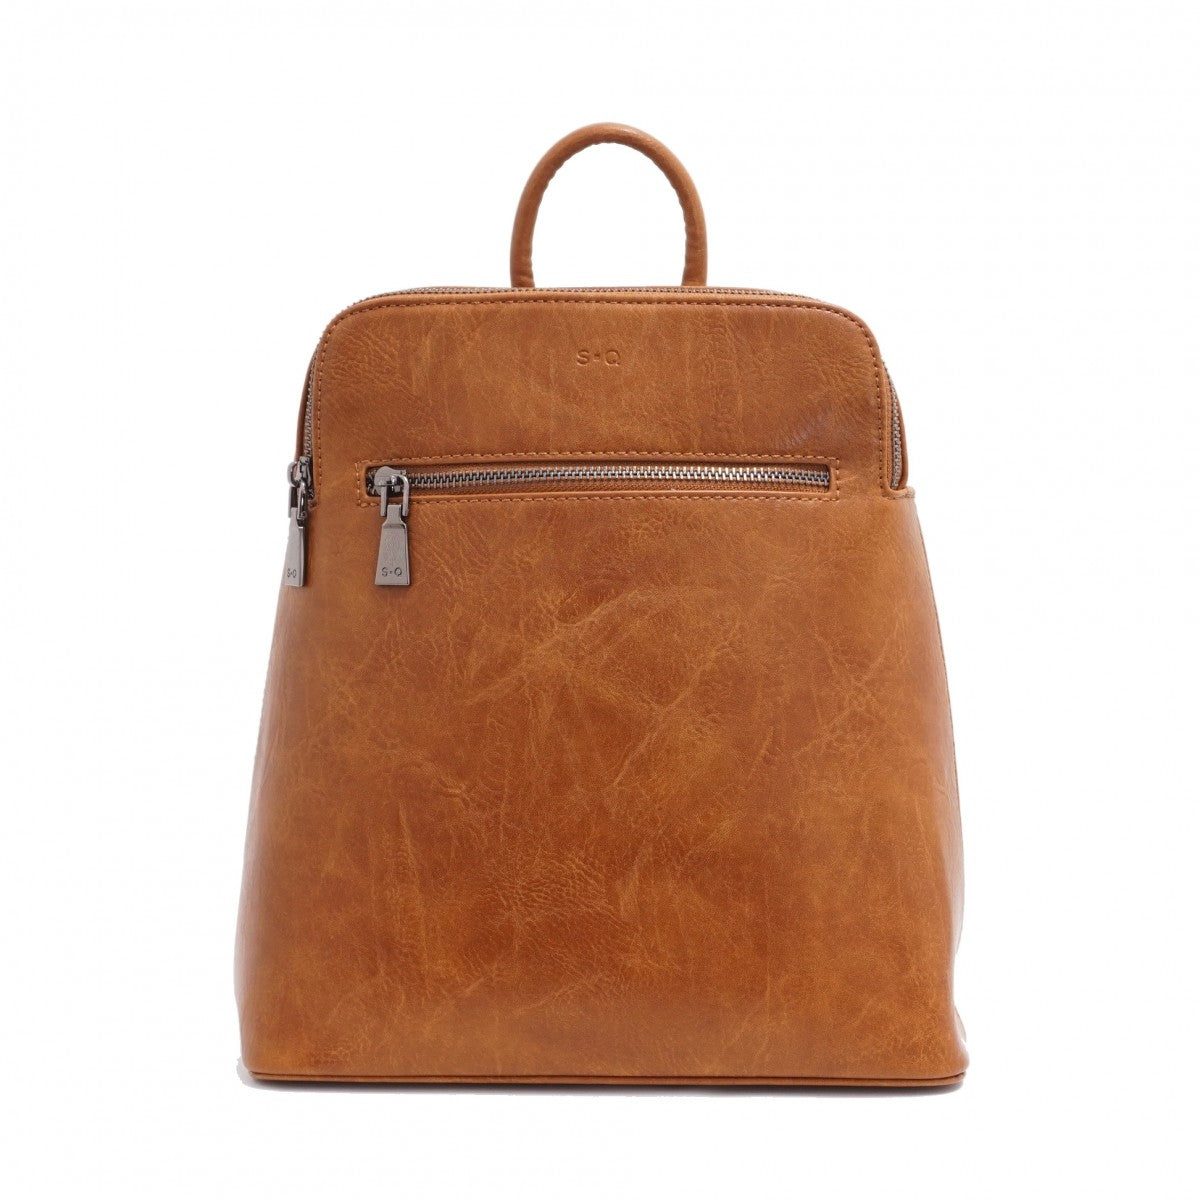 S-Q FEANNA CONVERTIBLE BACK PACK IN CAMEL